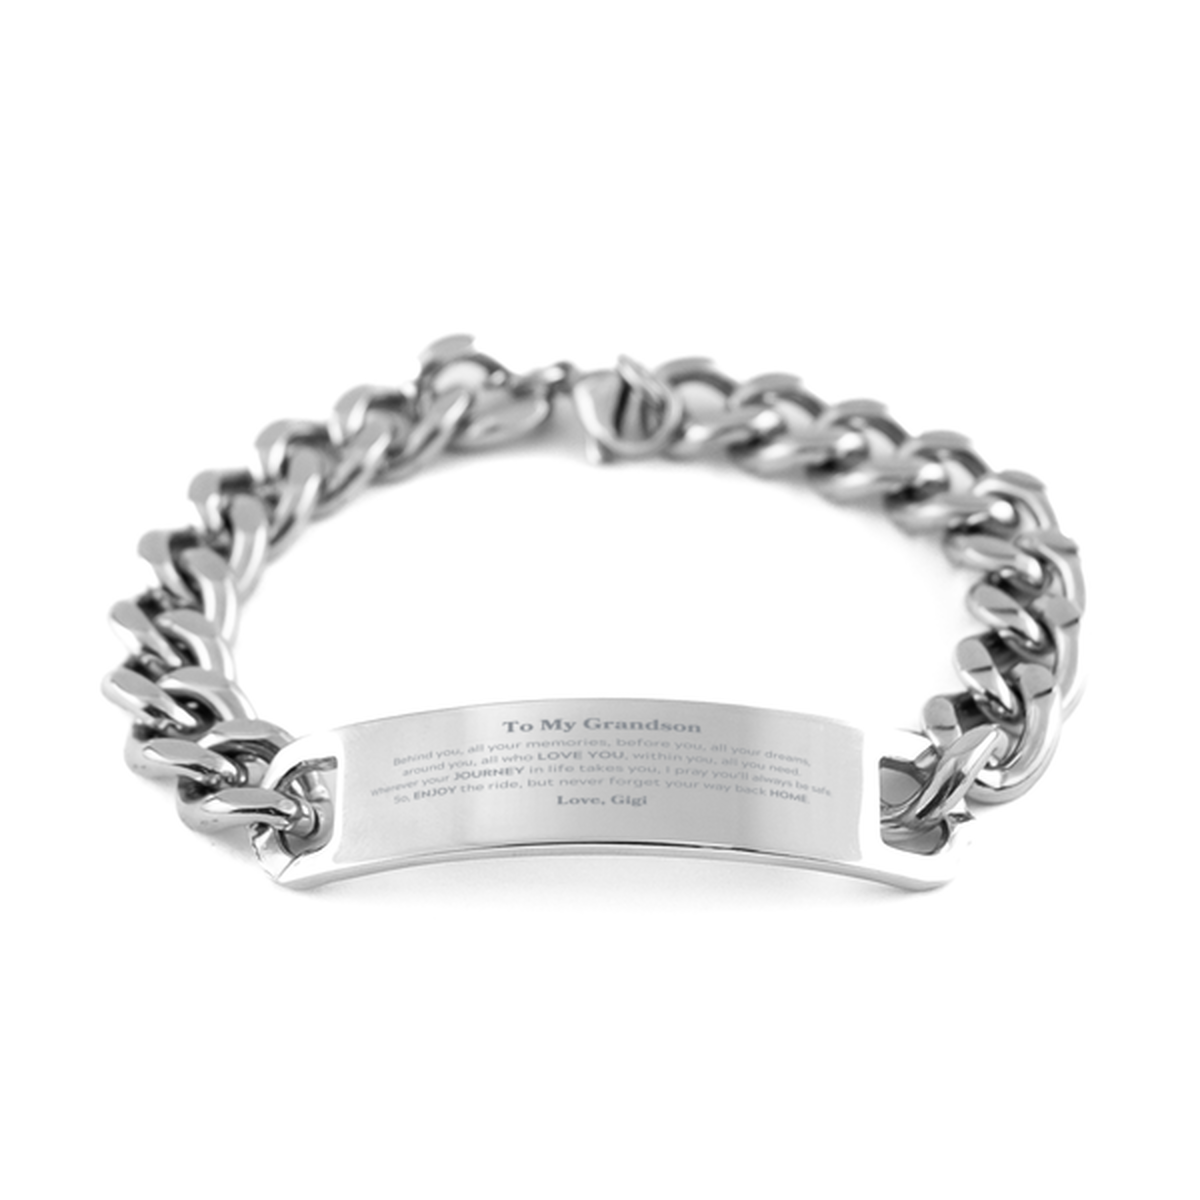 To My Grandson Graduation Gifts from Gigi, Grandson Cuban Chain Stainless Steel Bracelet Christmas Birthday Gifts for Grandson Behind you, all your memories, before you, all your dreams. Love, Gigi